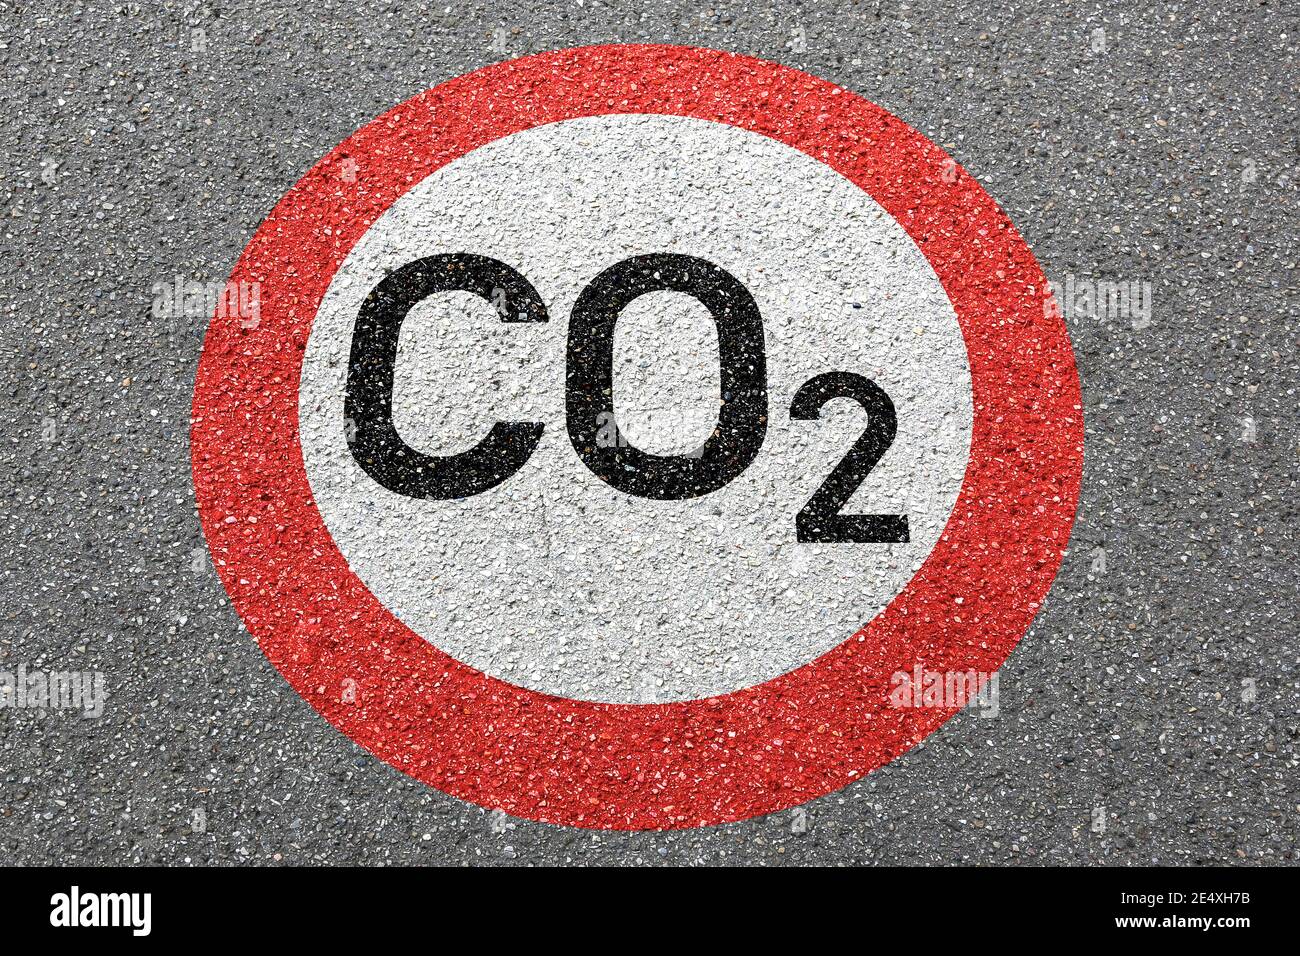 CO2 emissions emission Carbon dioxide air pollution reduction road sign zone concept Stock Photo